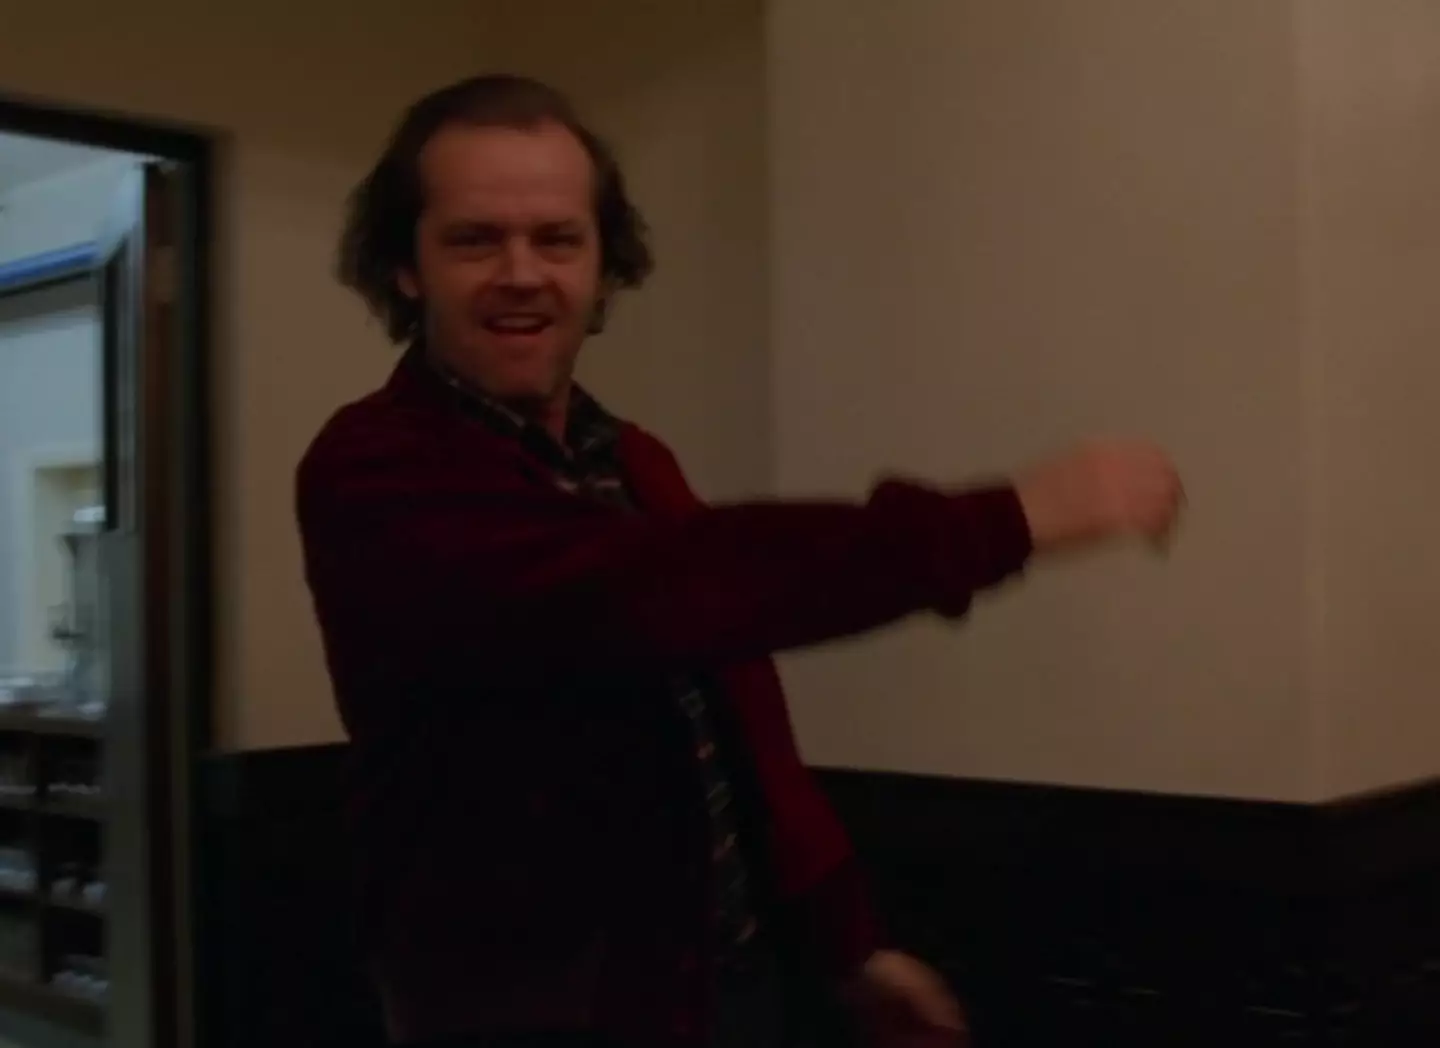 You as you go off to rewatch The Shining.